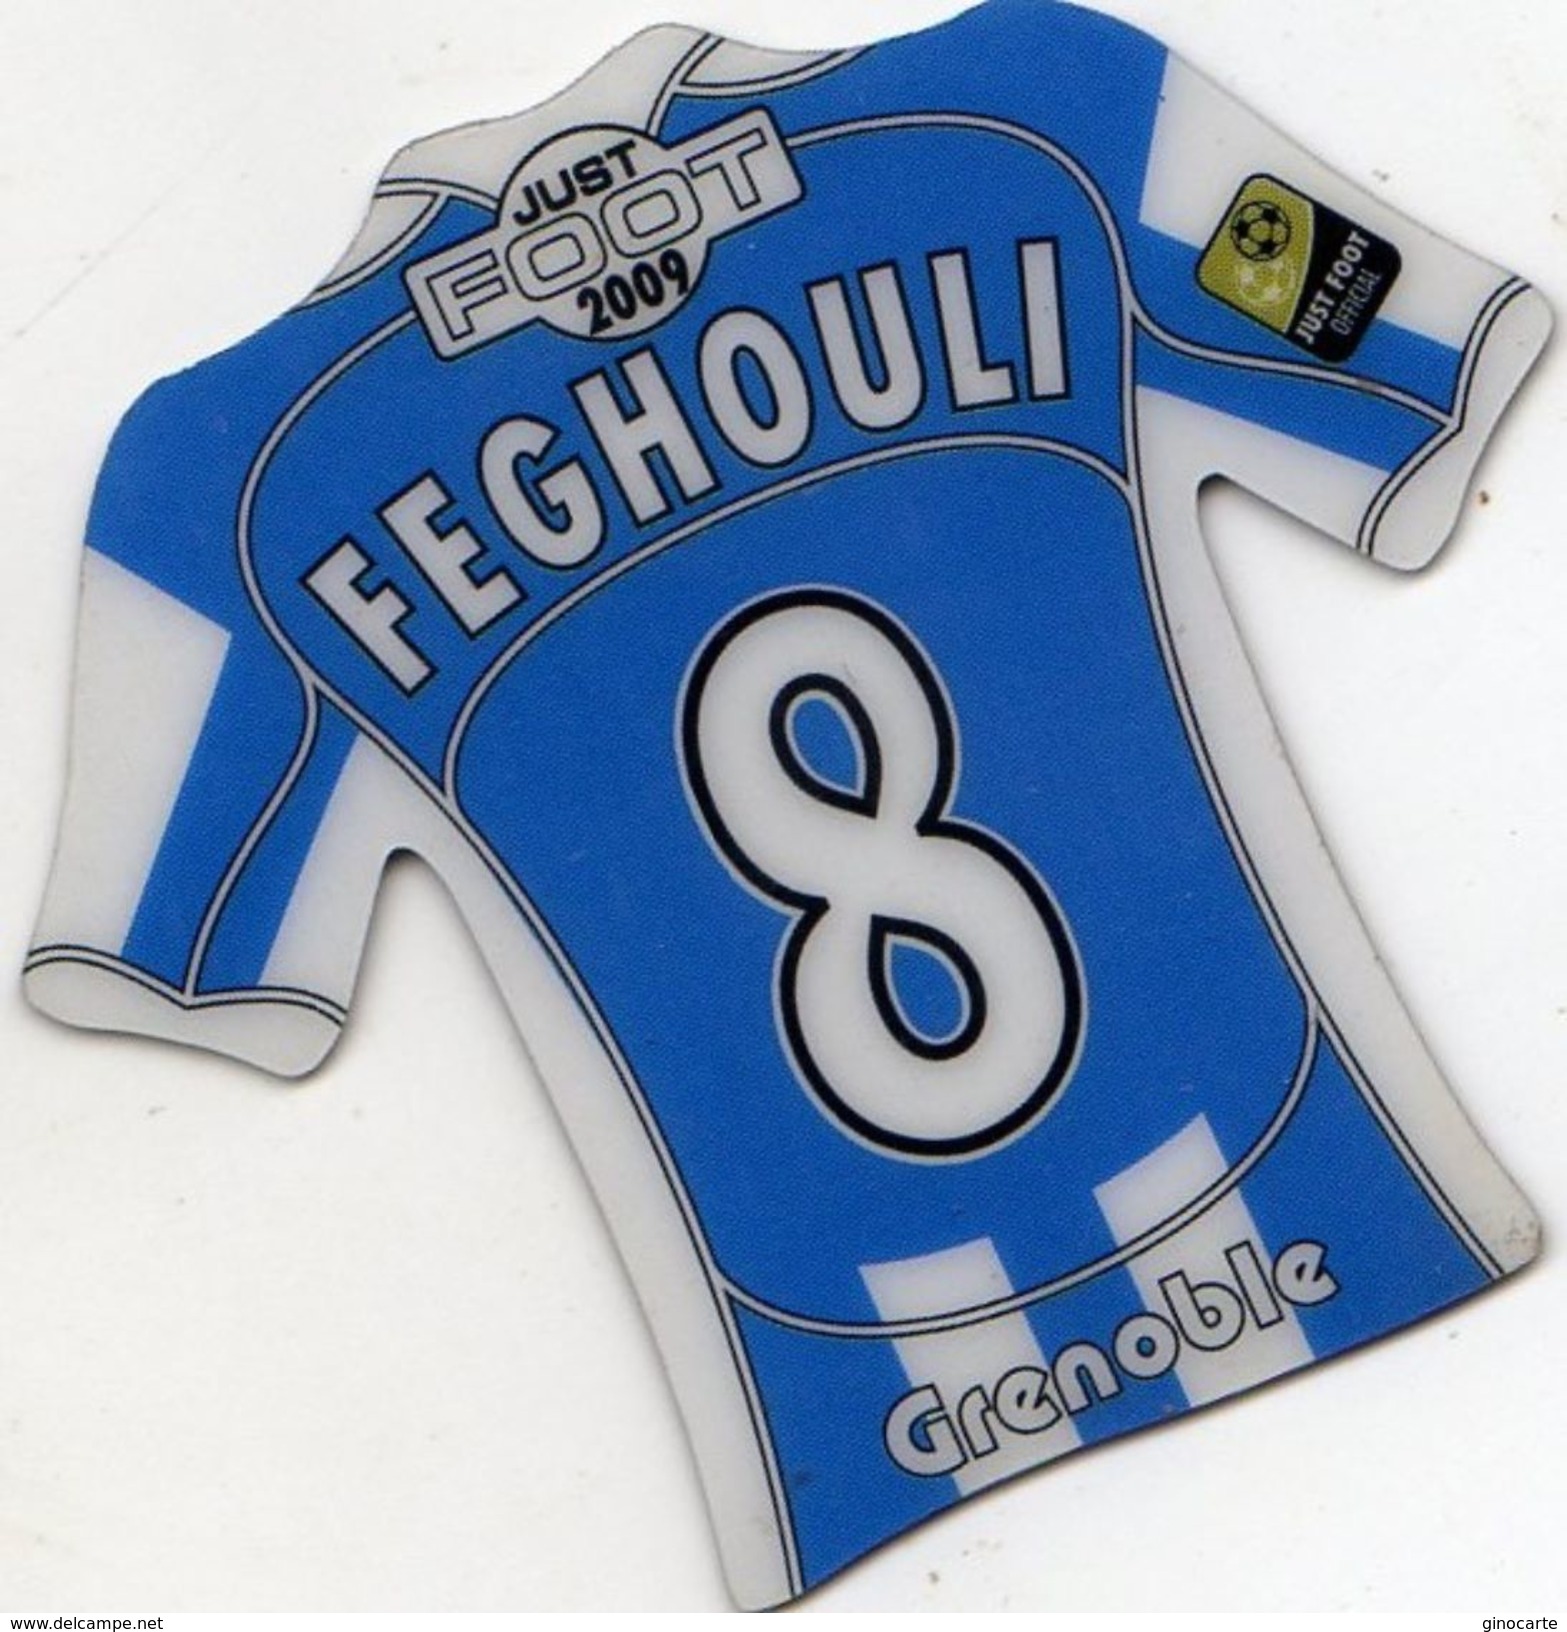 Magnet Magnets Maillot De Football Pitch Grenoble Feghouli 2009 - Sports